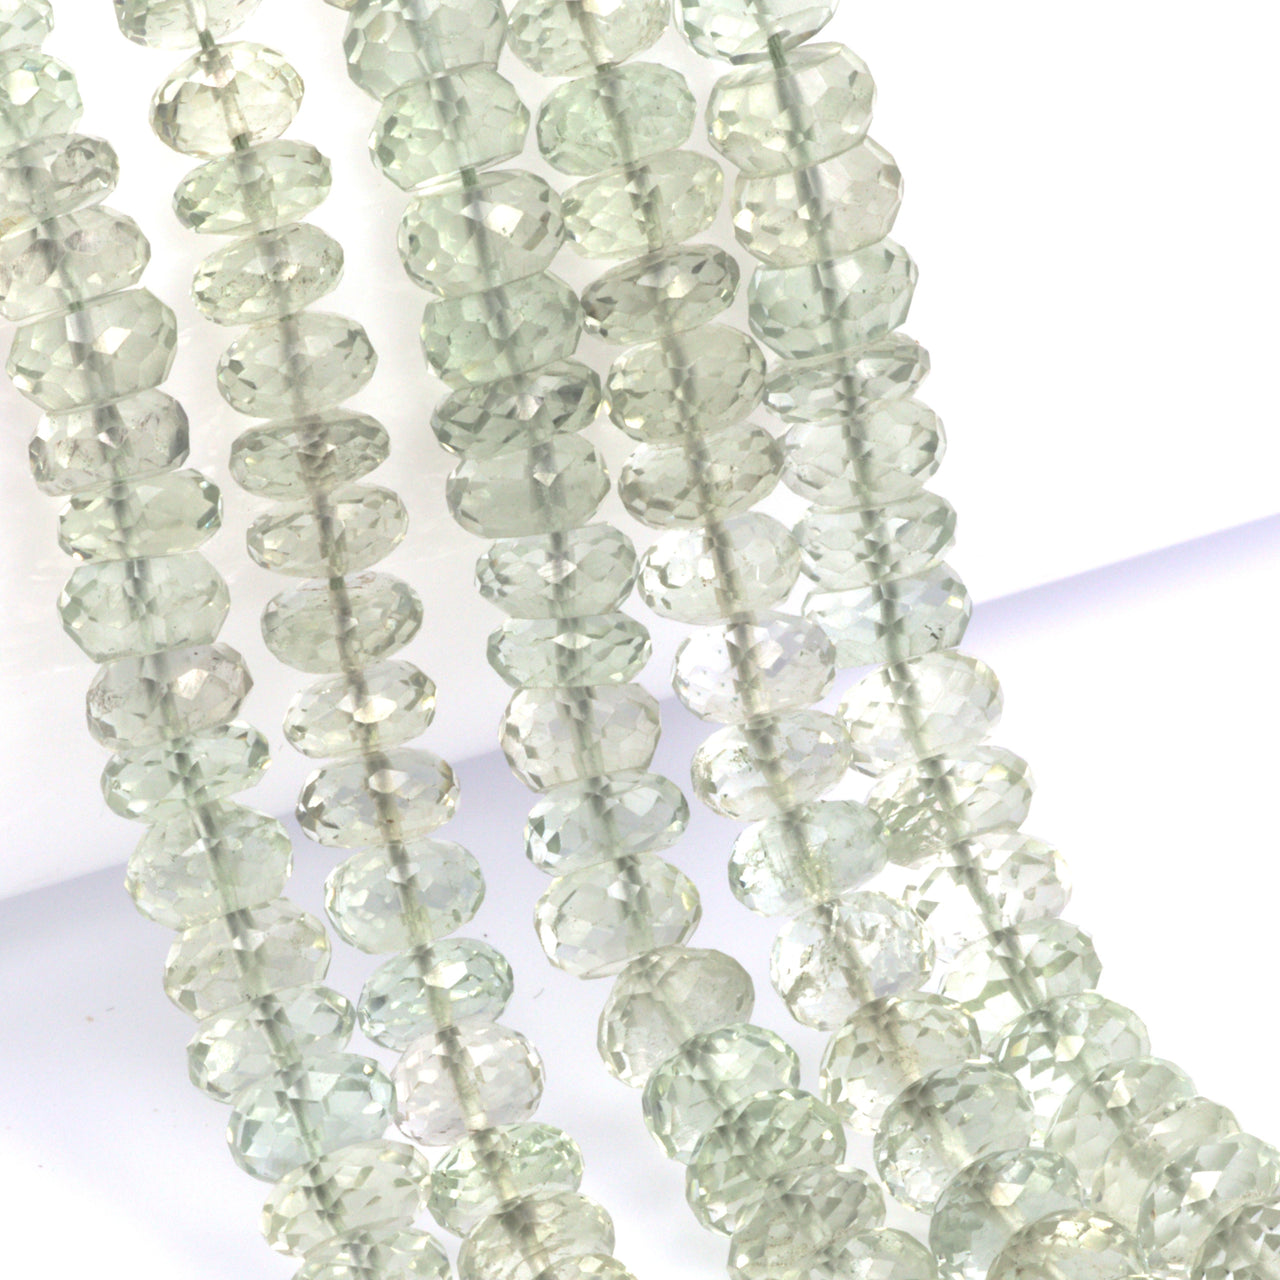 Green Amethyst 7mm Faceted Rondelles